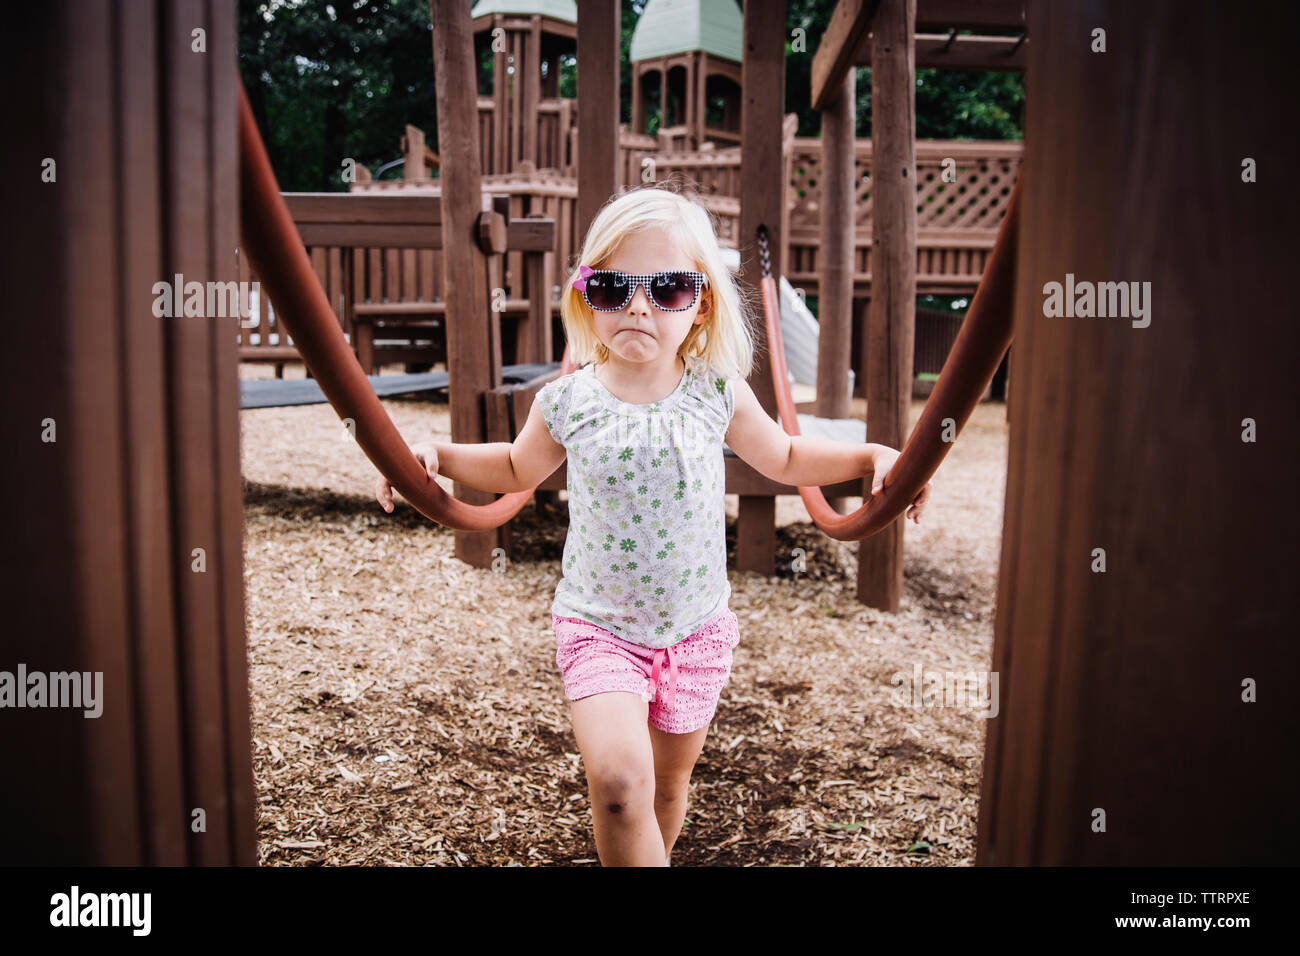 Portrait of girl wearing sunglasses while standing at playground Stock Photo